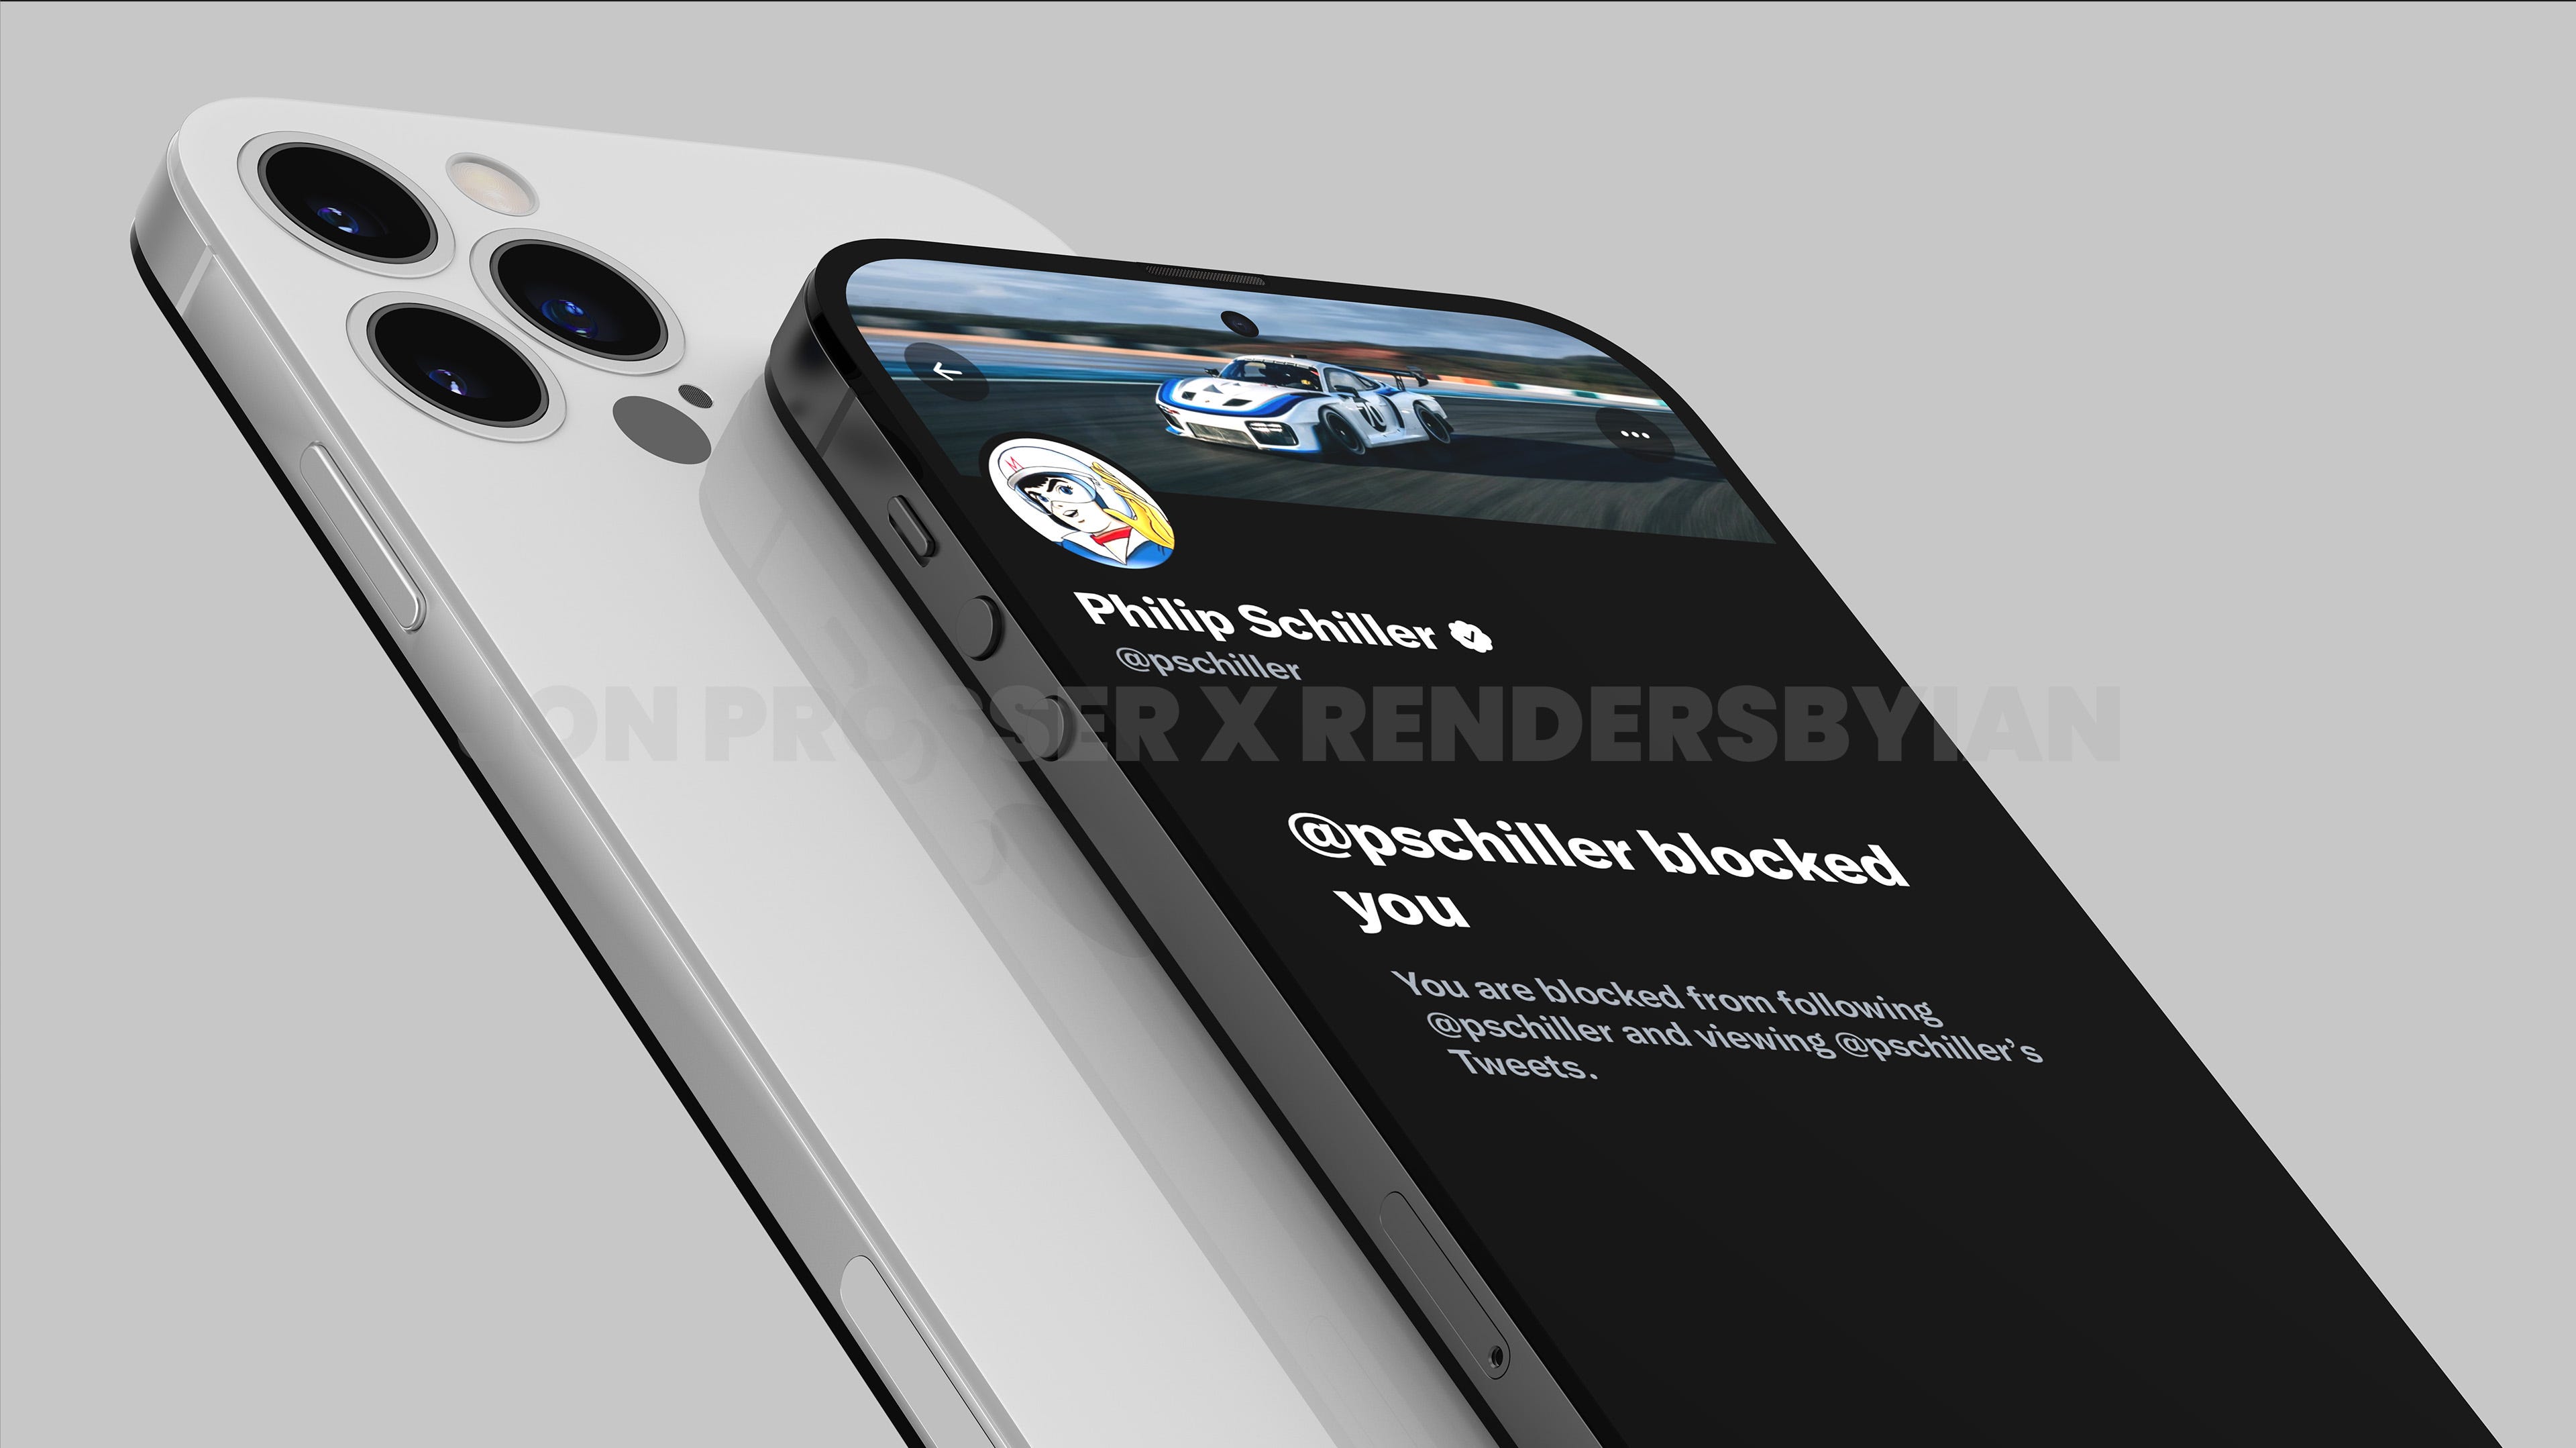 An early render of the iPhone 14 is shown in the color white